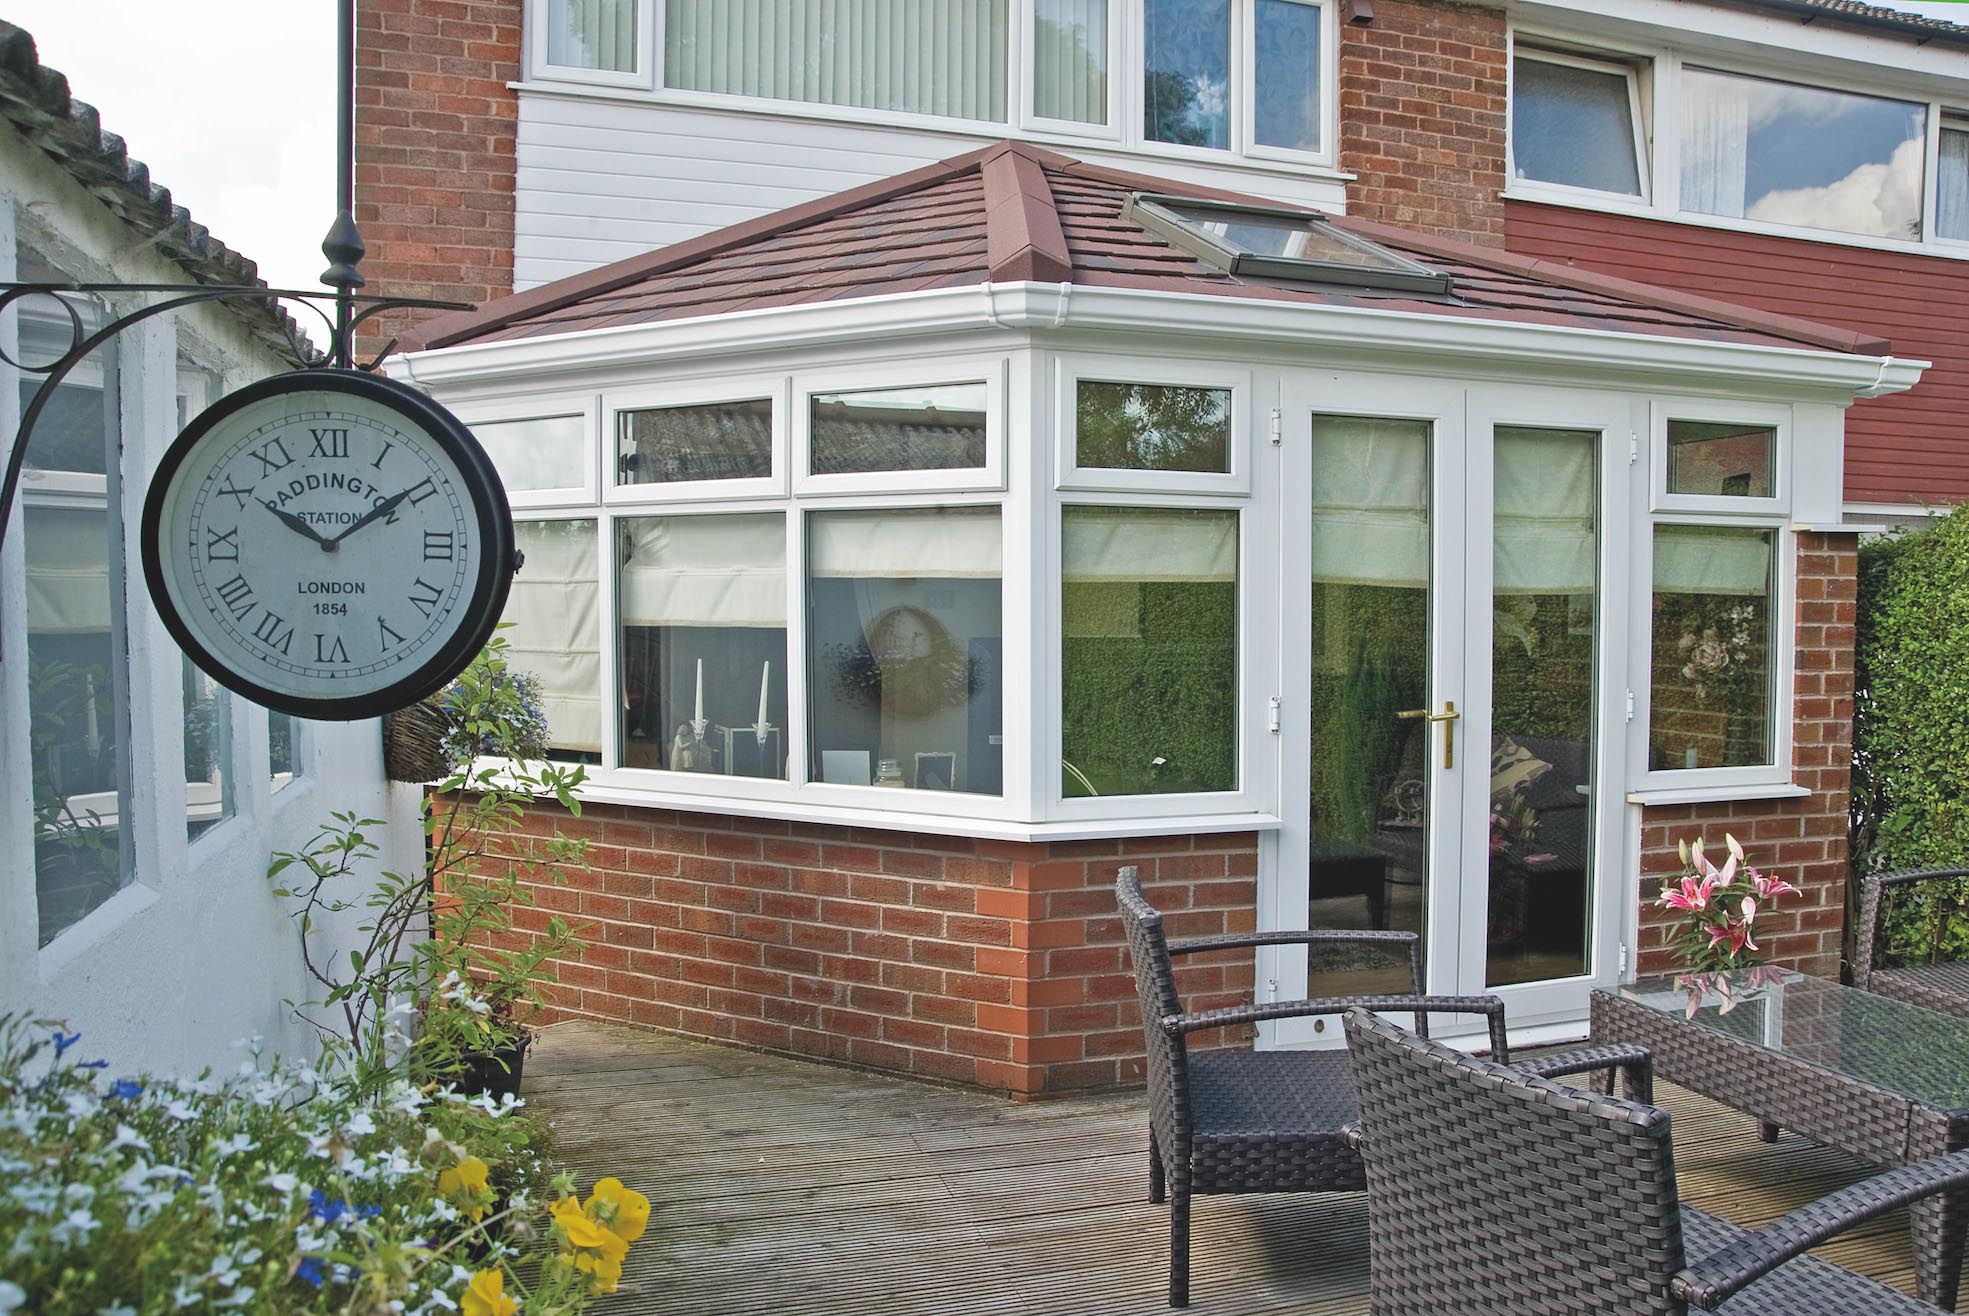 Conservatory refurbished with a Metrotile Lightweight Roof System Shingle Antique Red